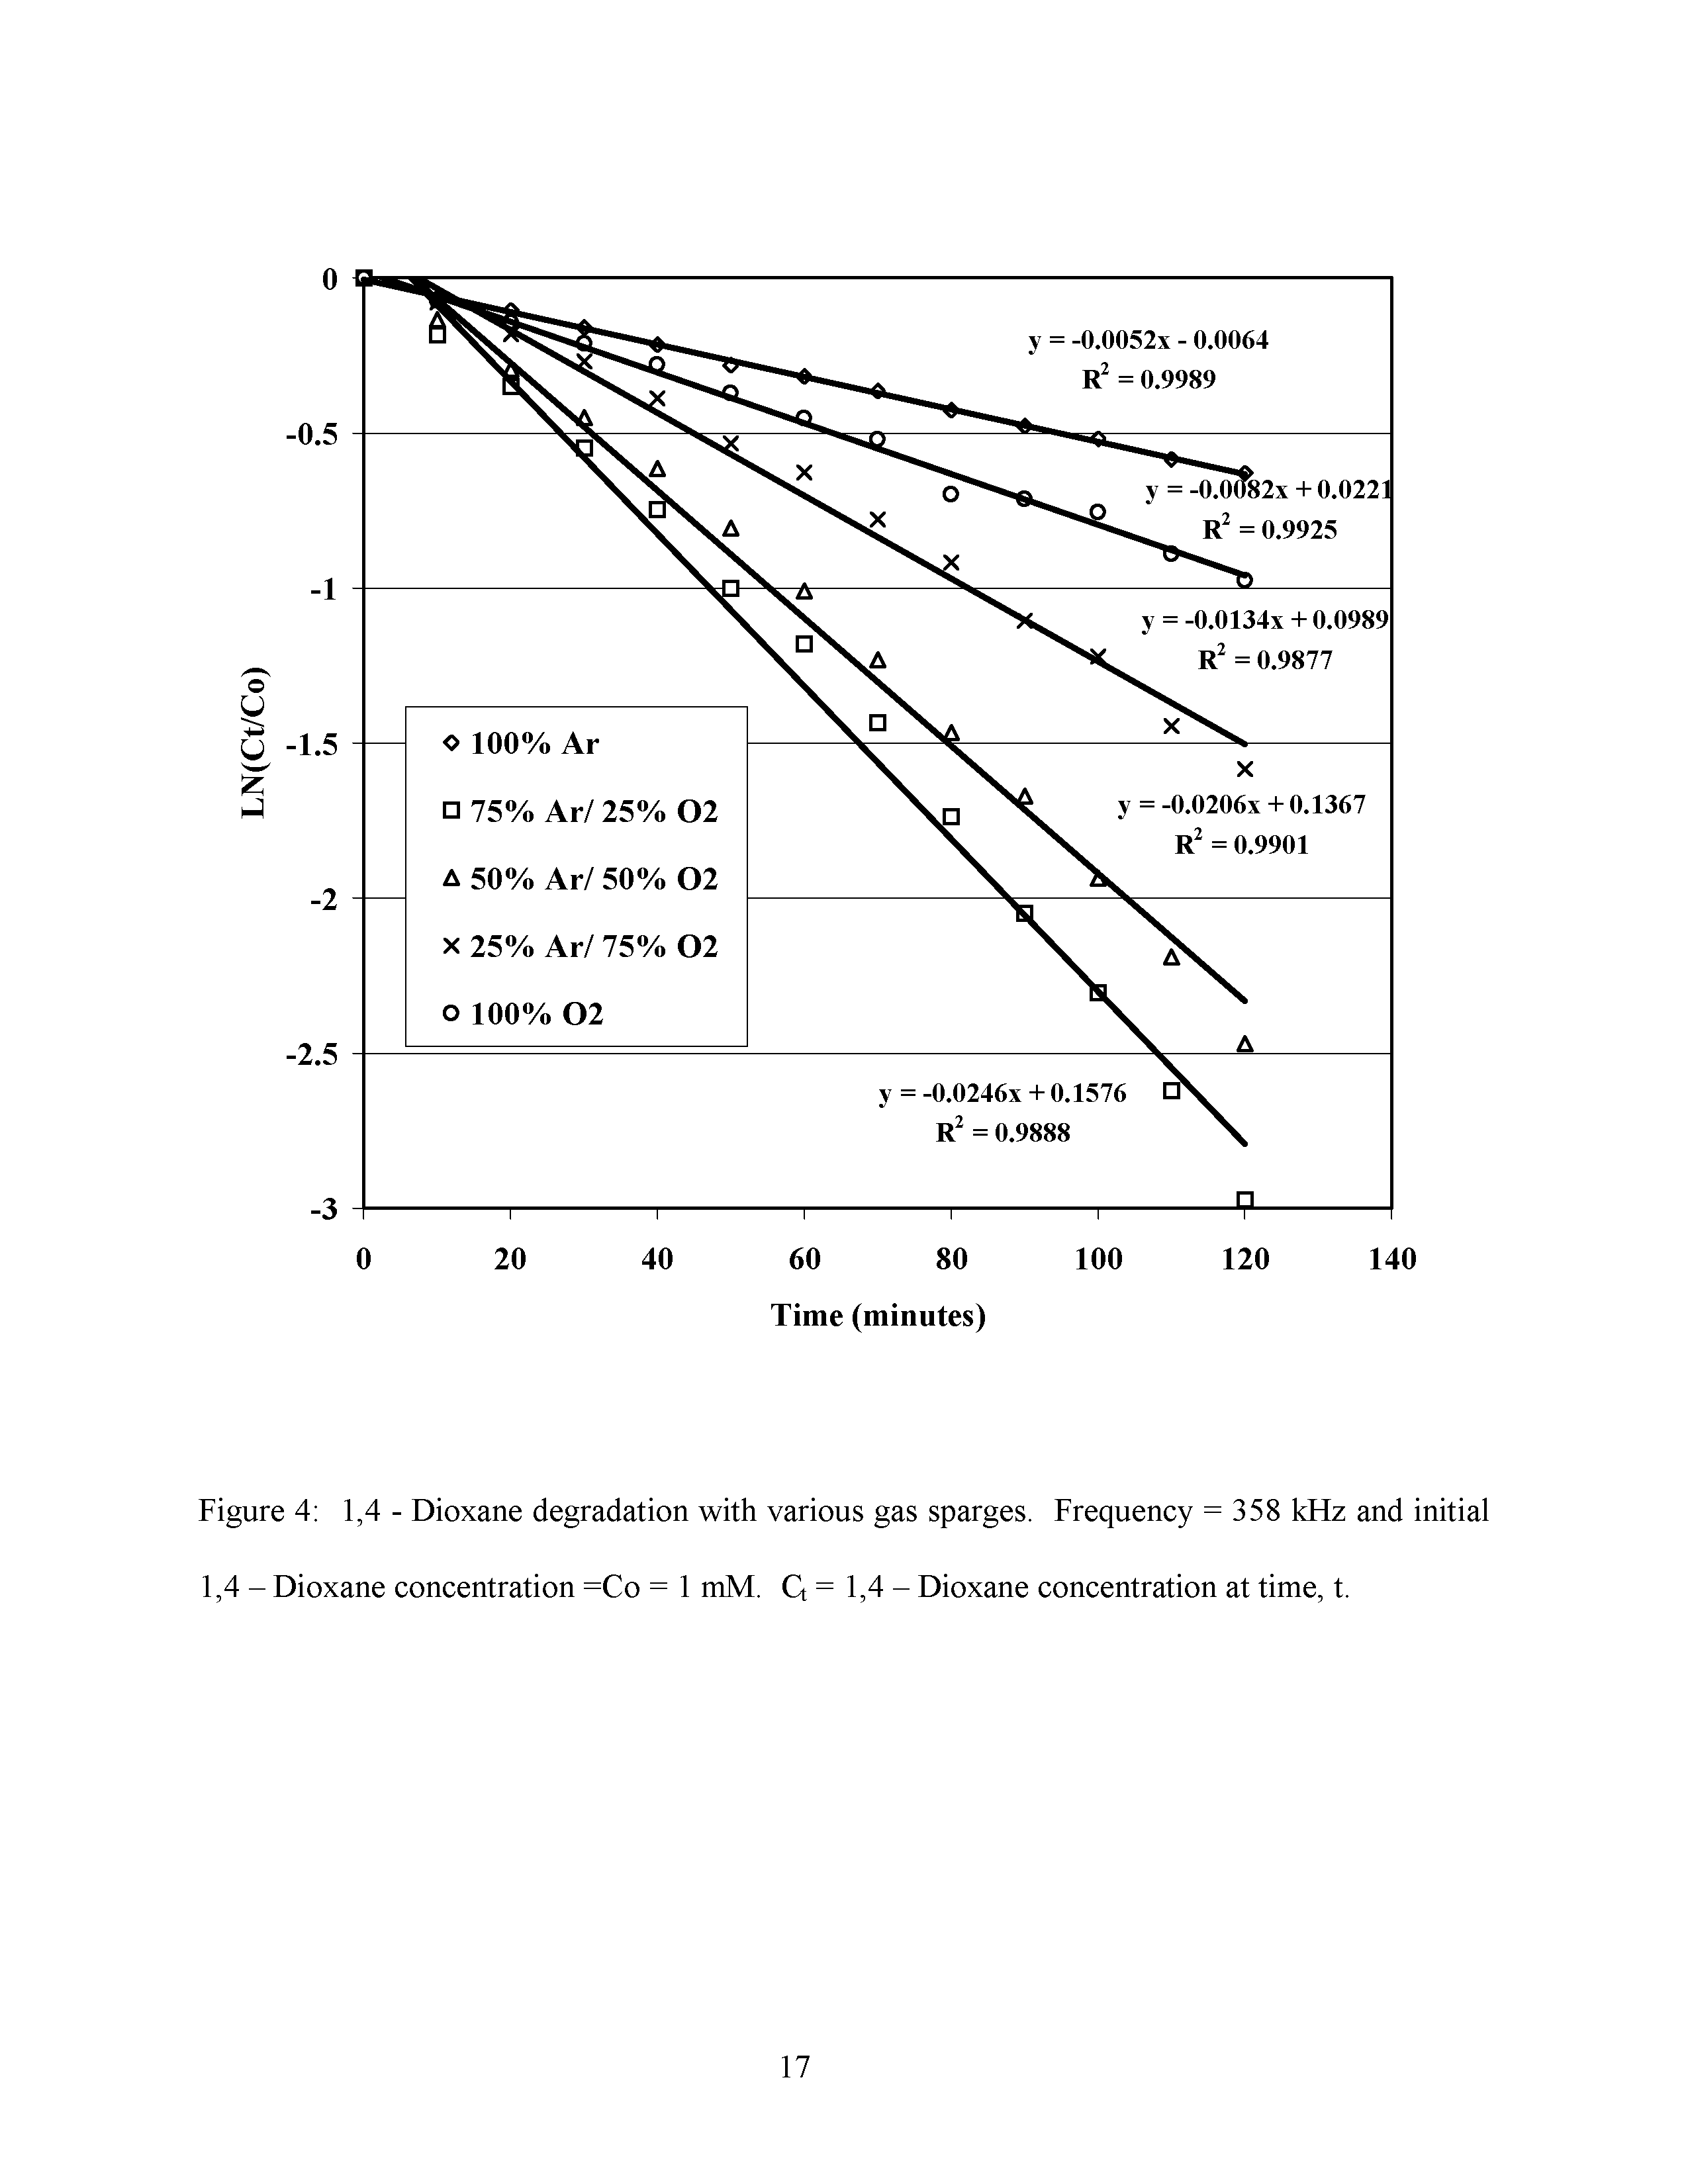 Figure 4 1,4 - Dioxane degradation with various gas sparges. Frequency = 358 kHz and initial 1,4 - Dioxane concentration =Co = 1 mM. Q = 1,4 - Dioxane concentration at time, t.